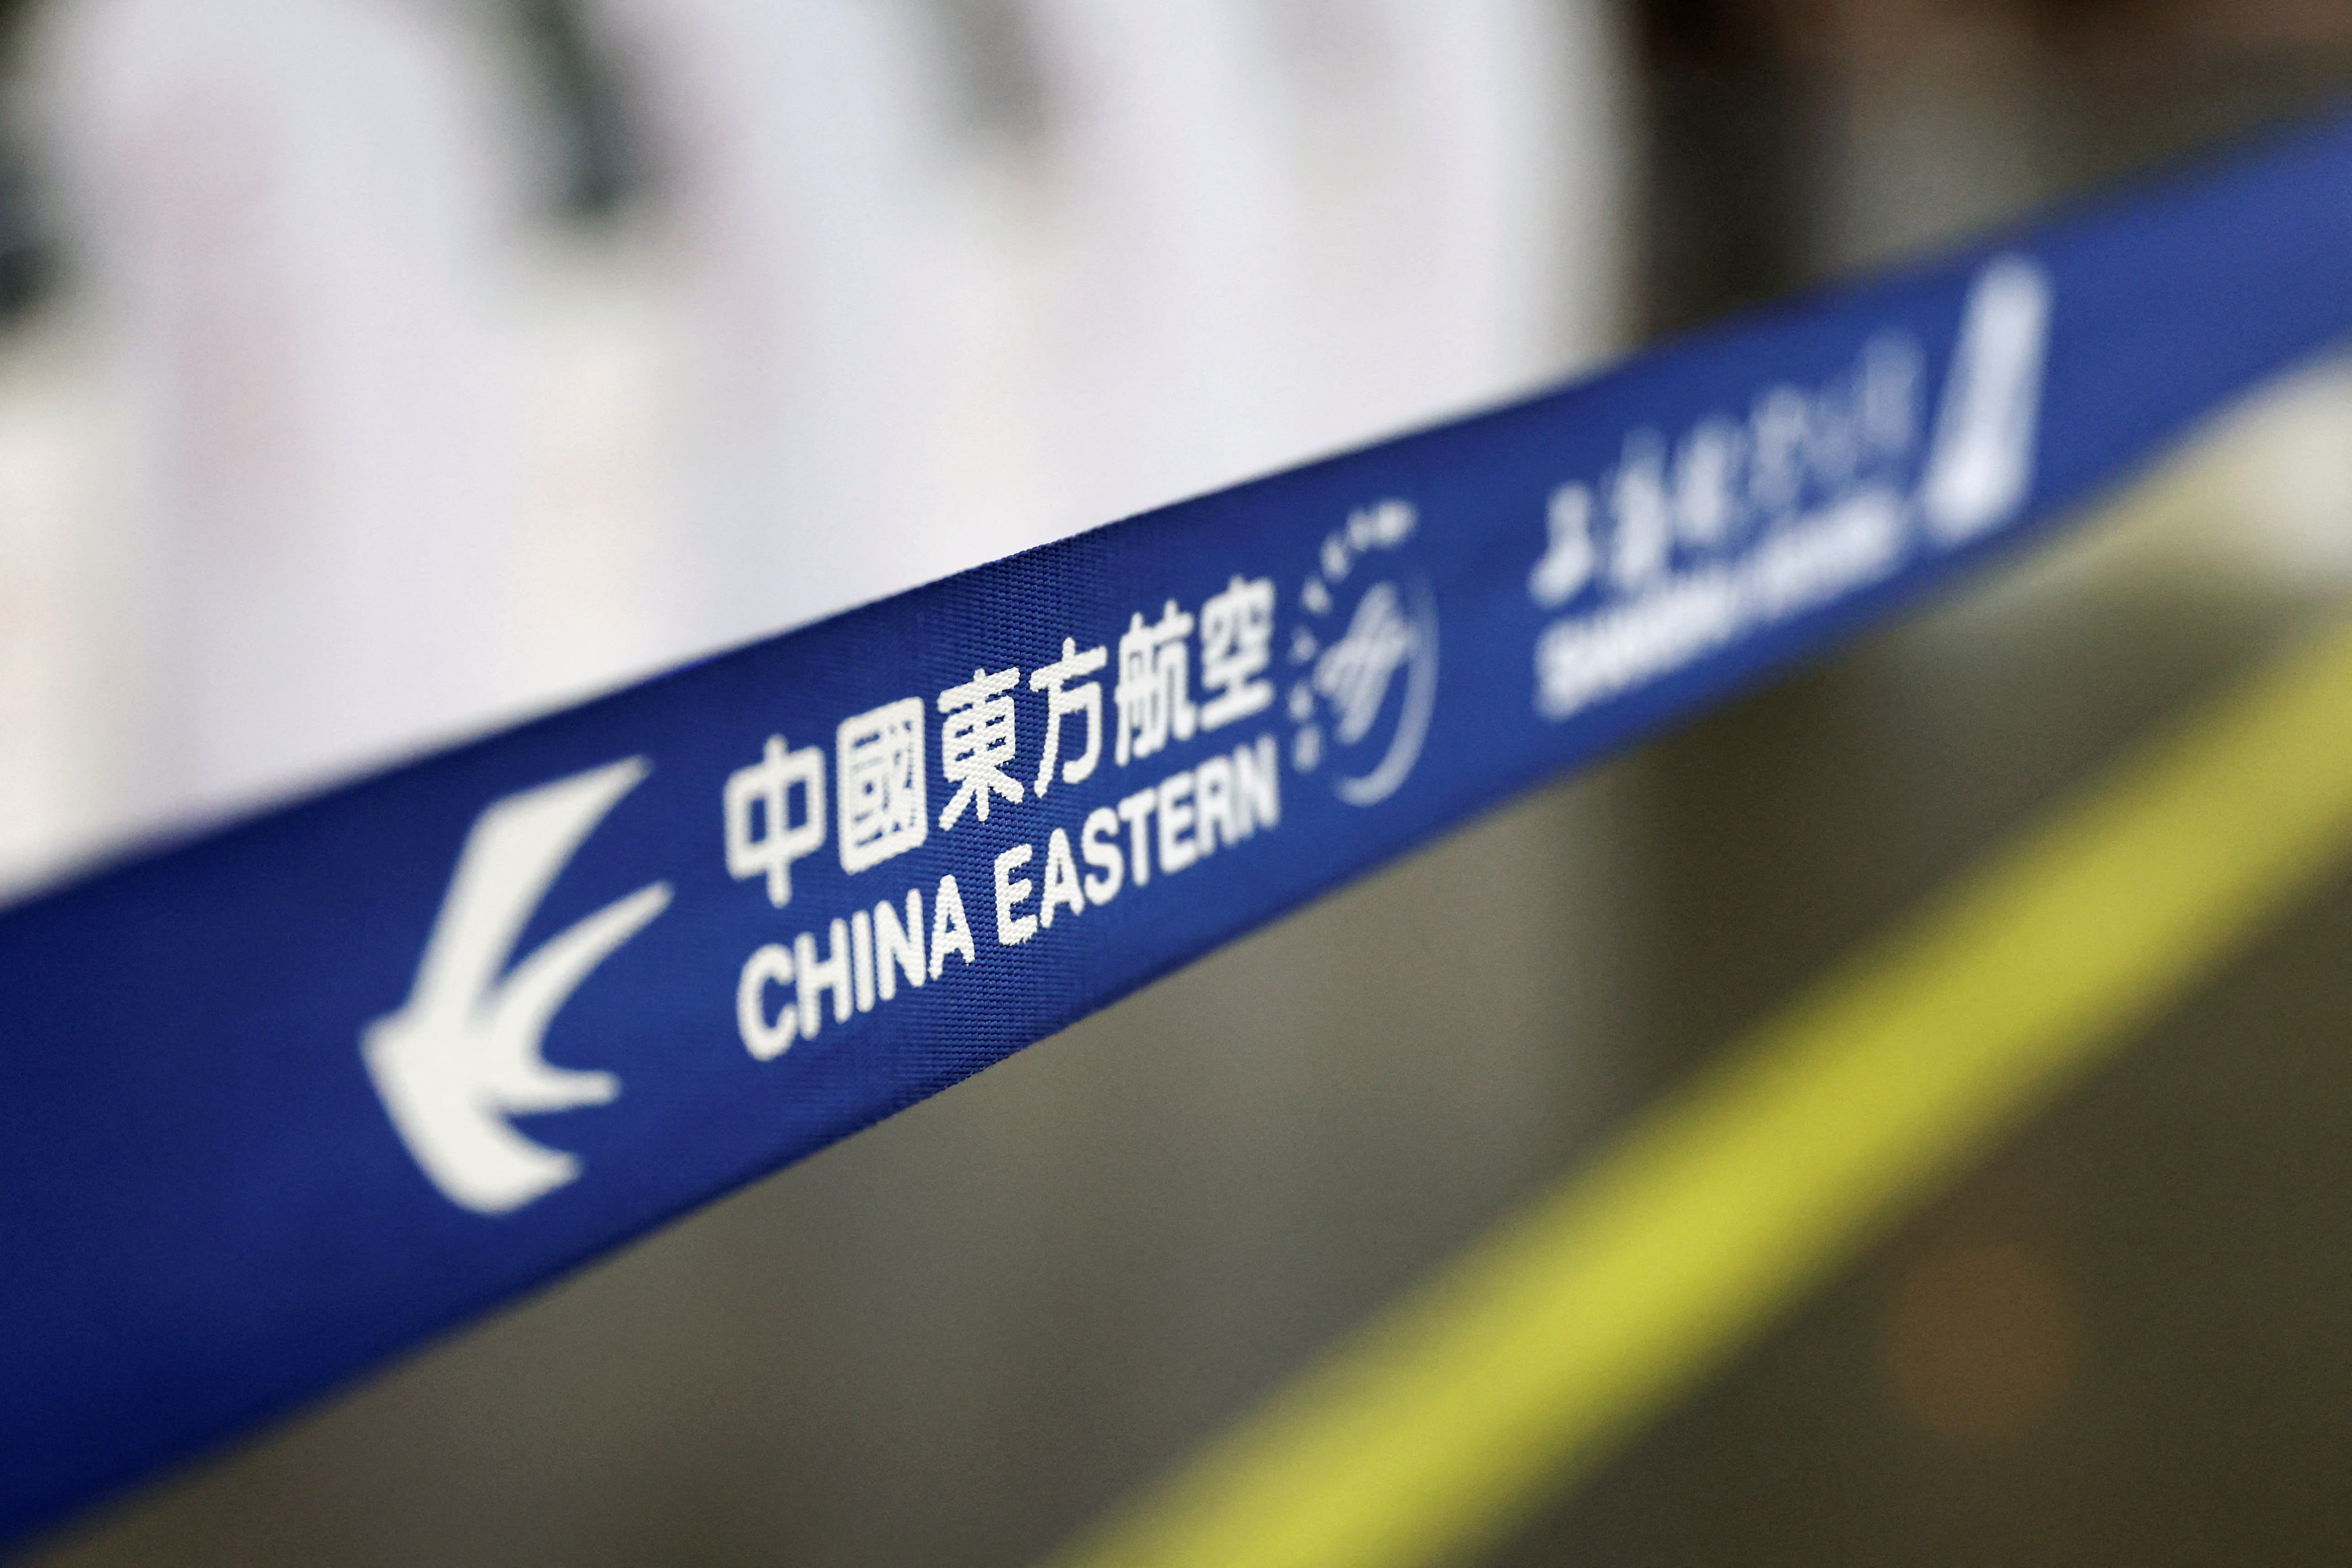 The logo of China Eastern Airlines is pictured at Beijing Capital International Airport in Beijing, China on March 21, 2022.
